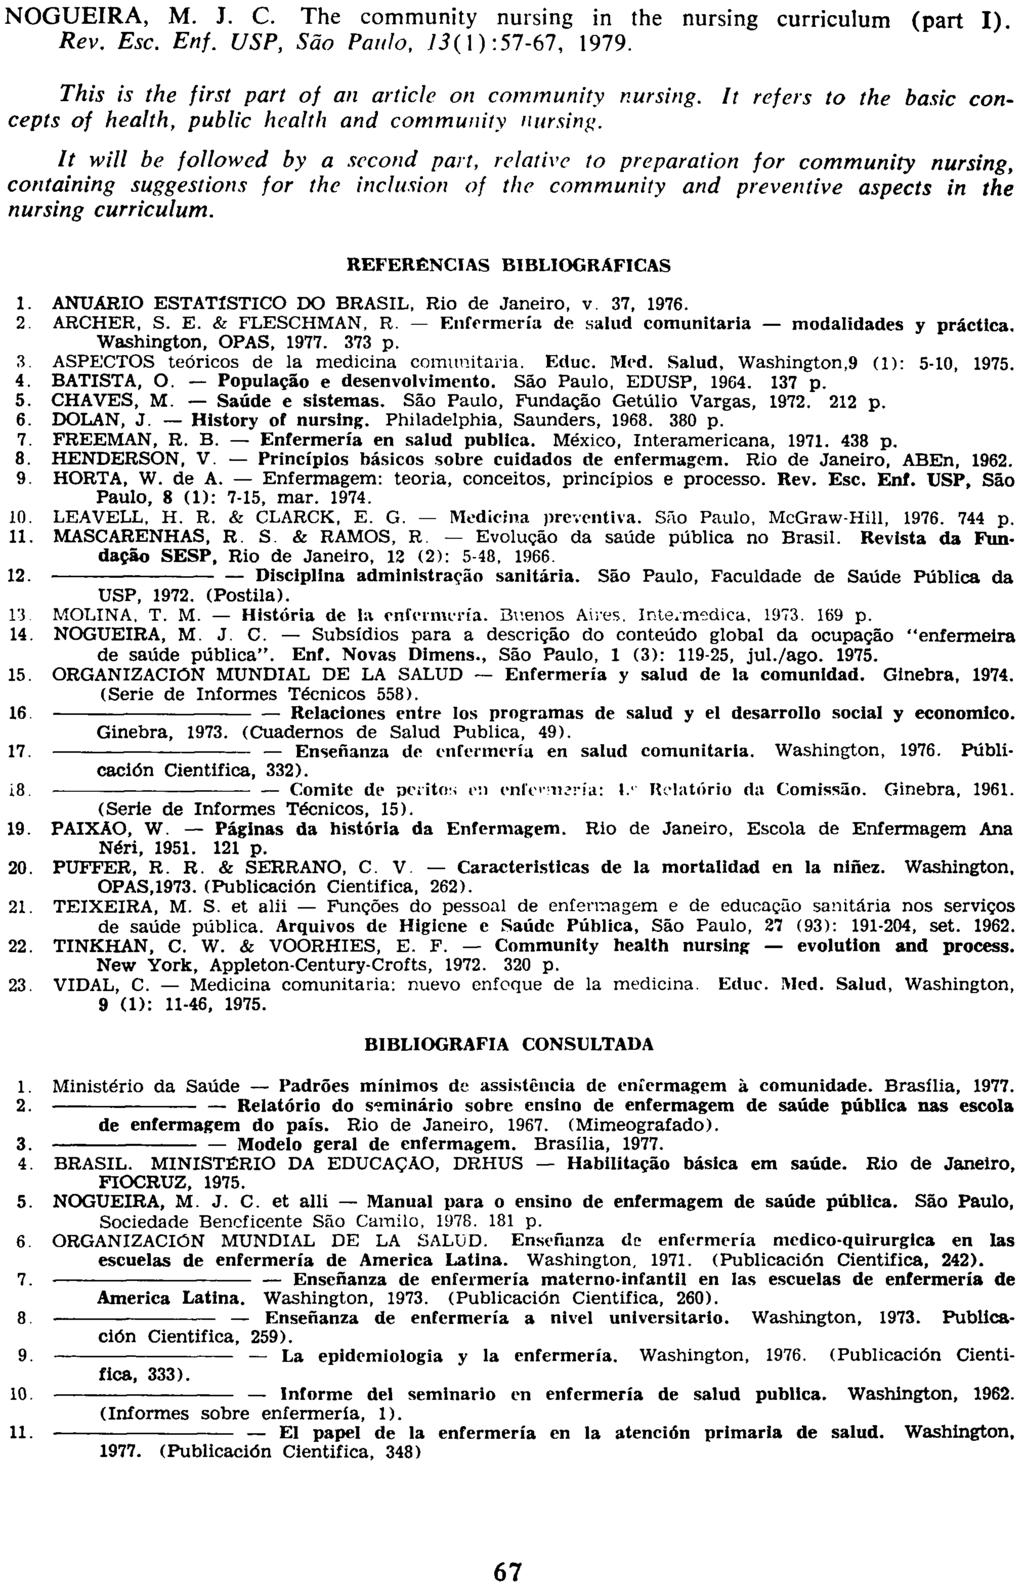 NOGUEIRA, M. J. C. The community nursing in the nursing curriculum (part I). Rev. Esc. Enf. USP, São Paulo, 75(1):57-67, 1979. This is the first part of an article on community nursing.